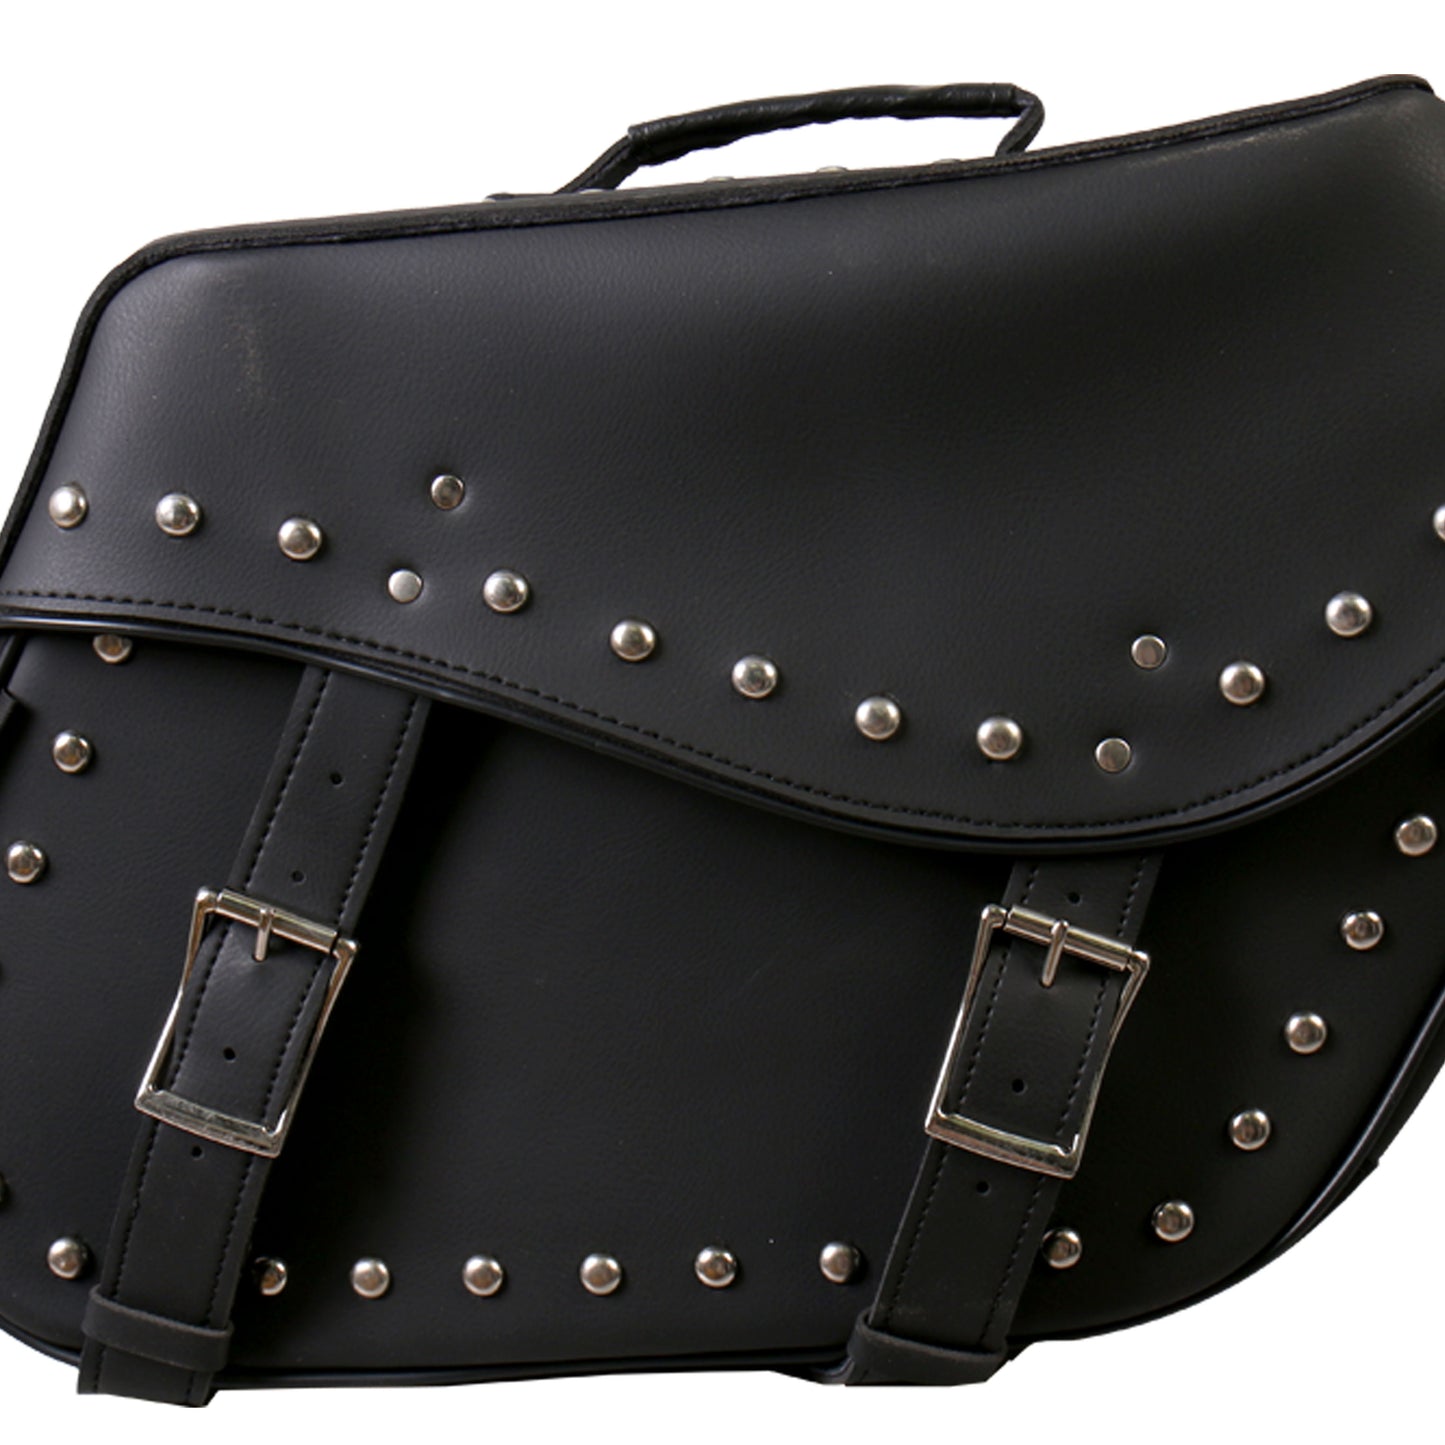 Hot Leathers SDB1005 Large Wide 2-Buckle PVC Studded Saddle Bags 15X12X7